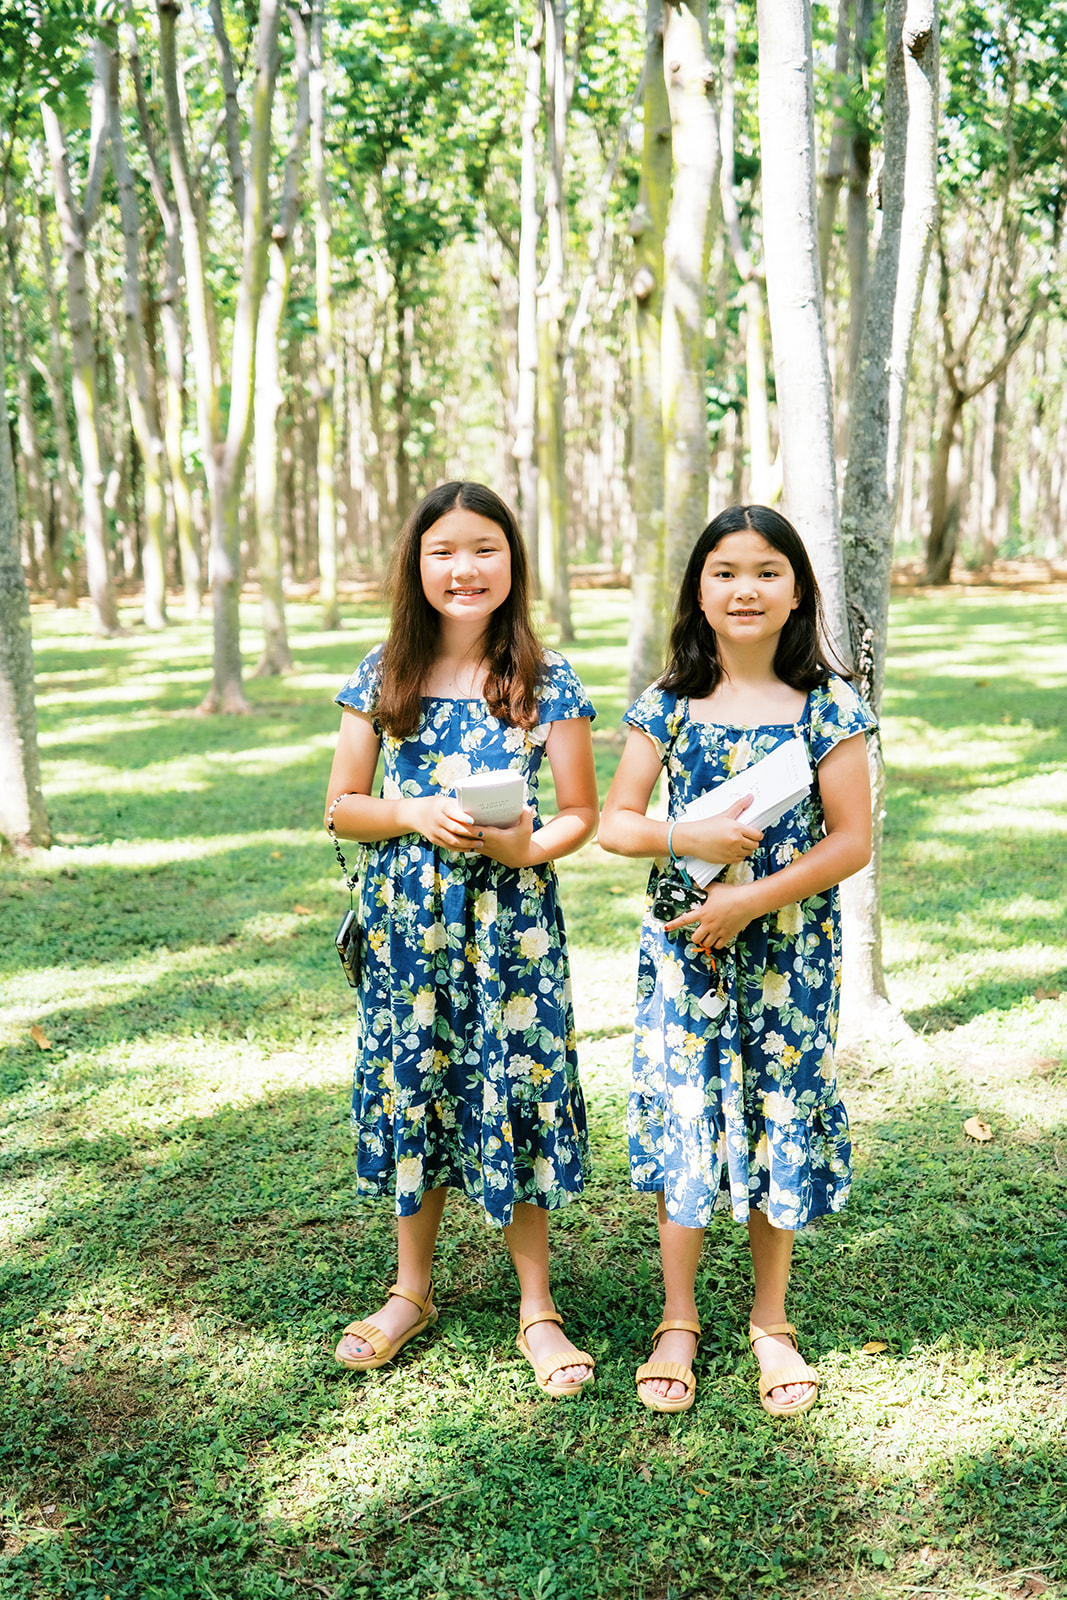 Two girls in matching floral dresses standing in a forest clearing Wedding at Na ‘Āina Kai captured by Megan Moura